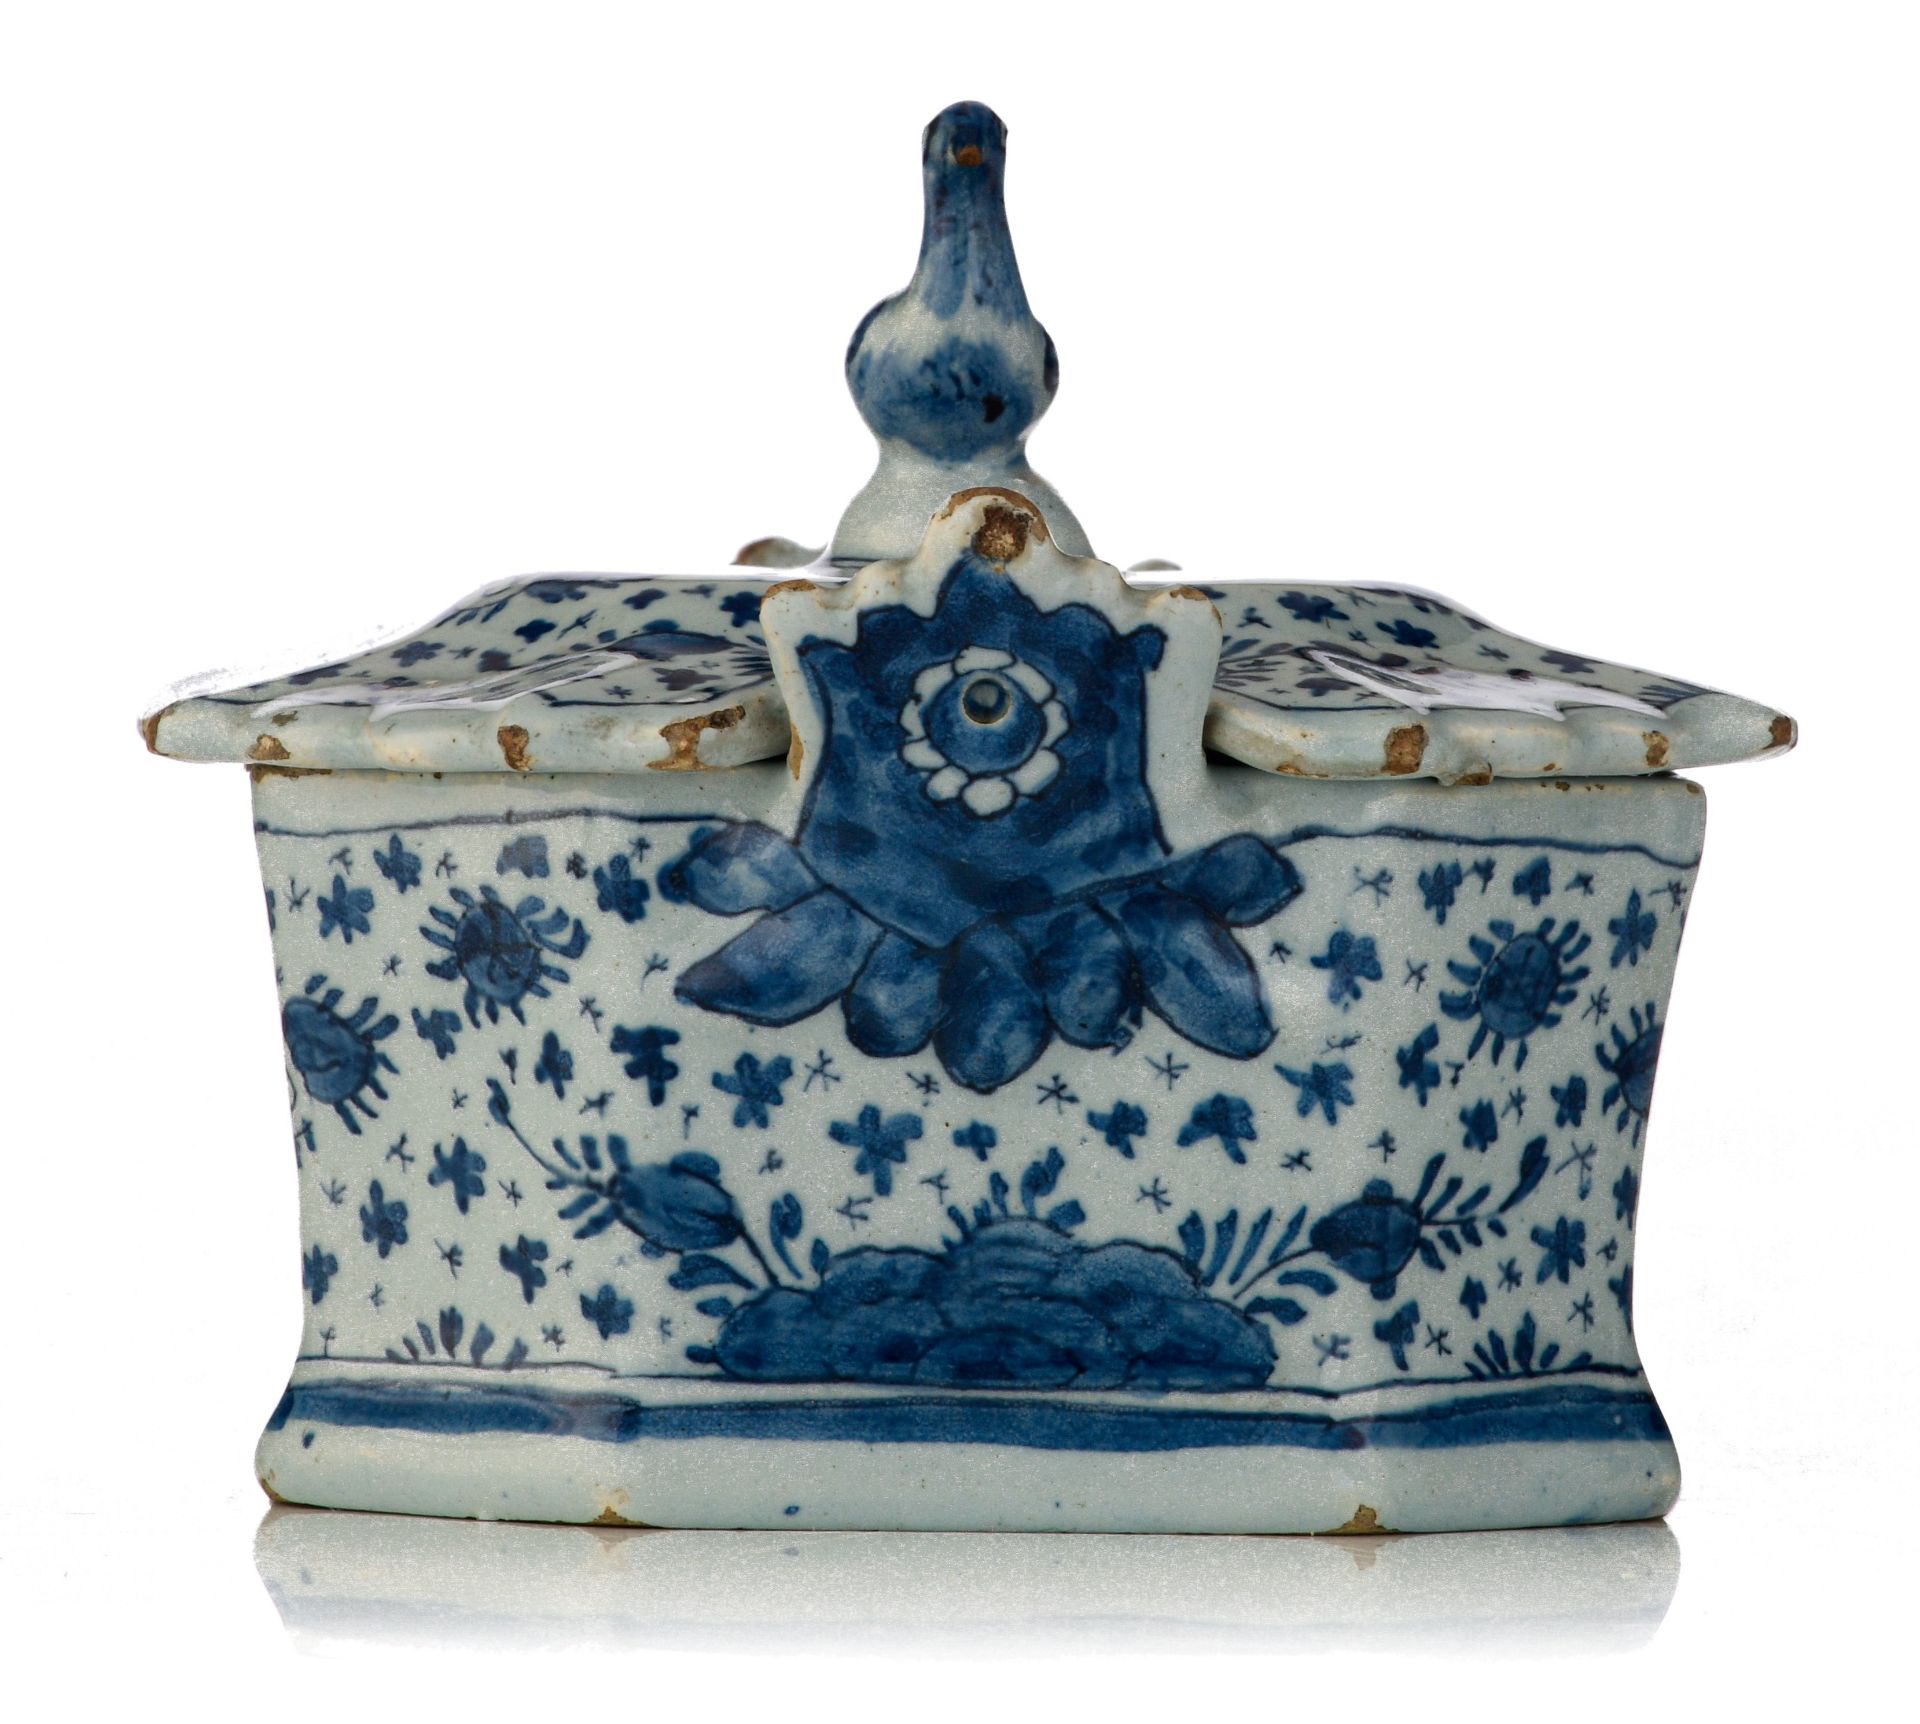 (BIDDING ONLY ON CARLOBONTE.BE) A fine Delft blue and white butter tub, marked 'De Lampetkan', 18thC - Image 3 of 14